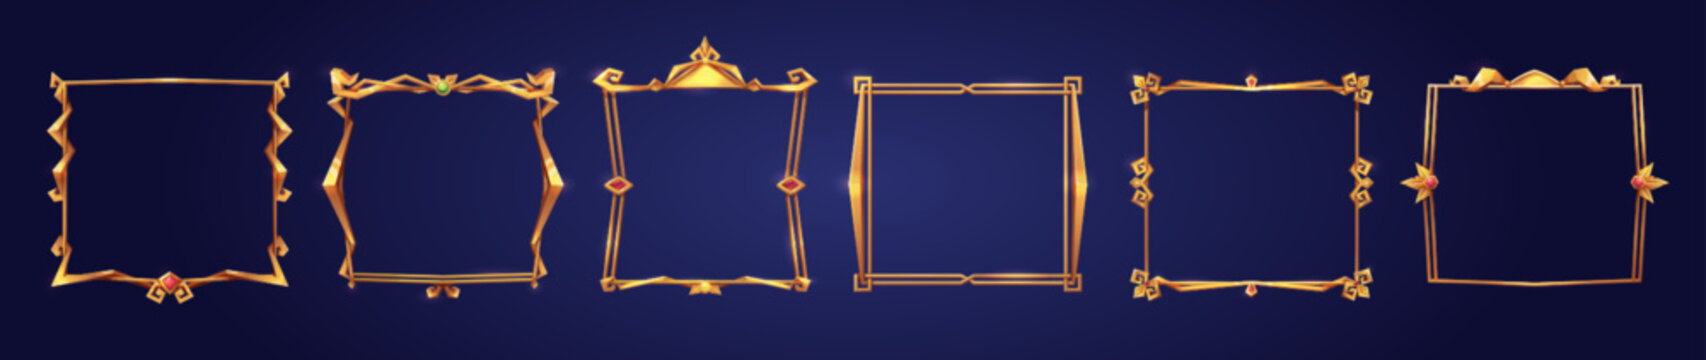 Empty square golden frames in medieval style for game ui design. Vector cartoon set of user interface elements with gold metal flourish thin border with gems isolated on background